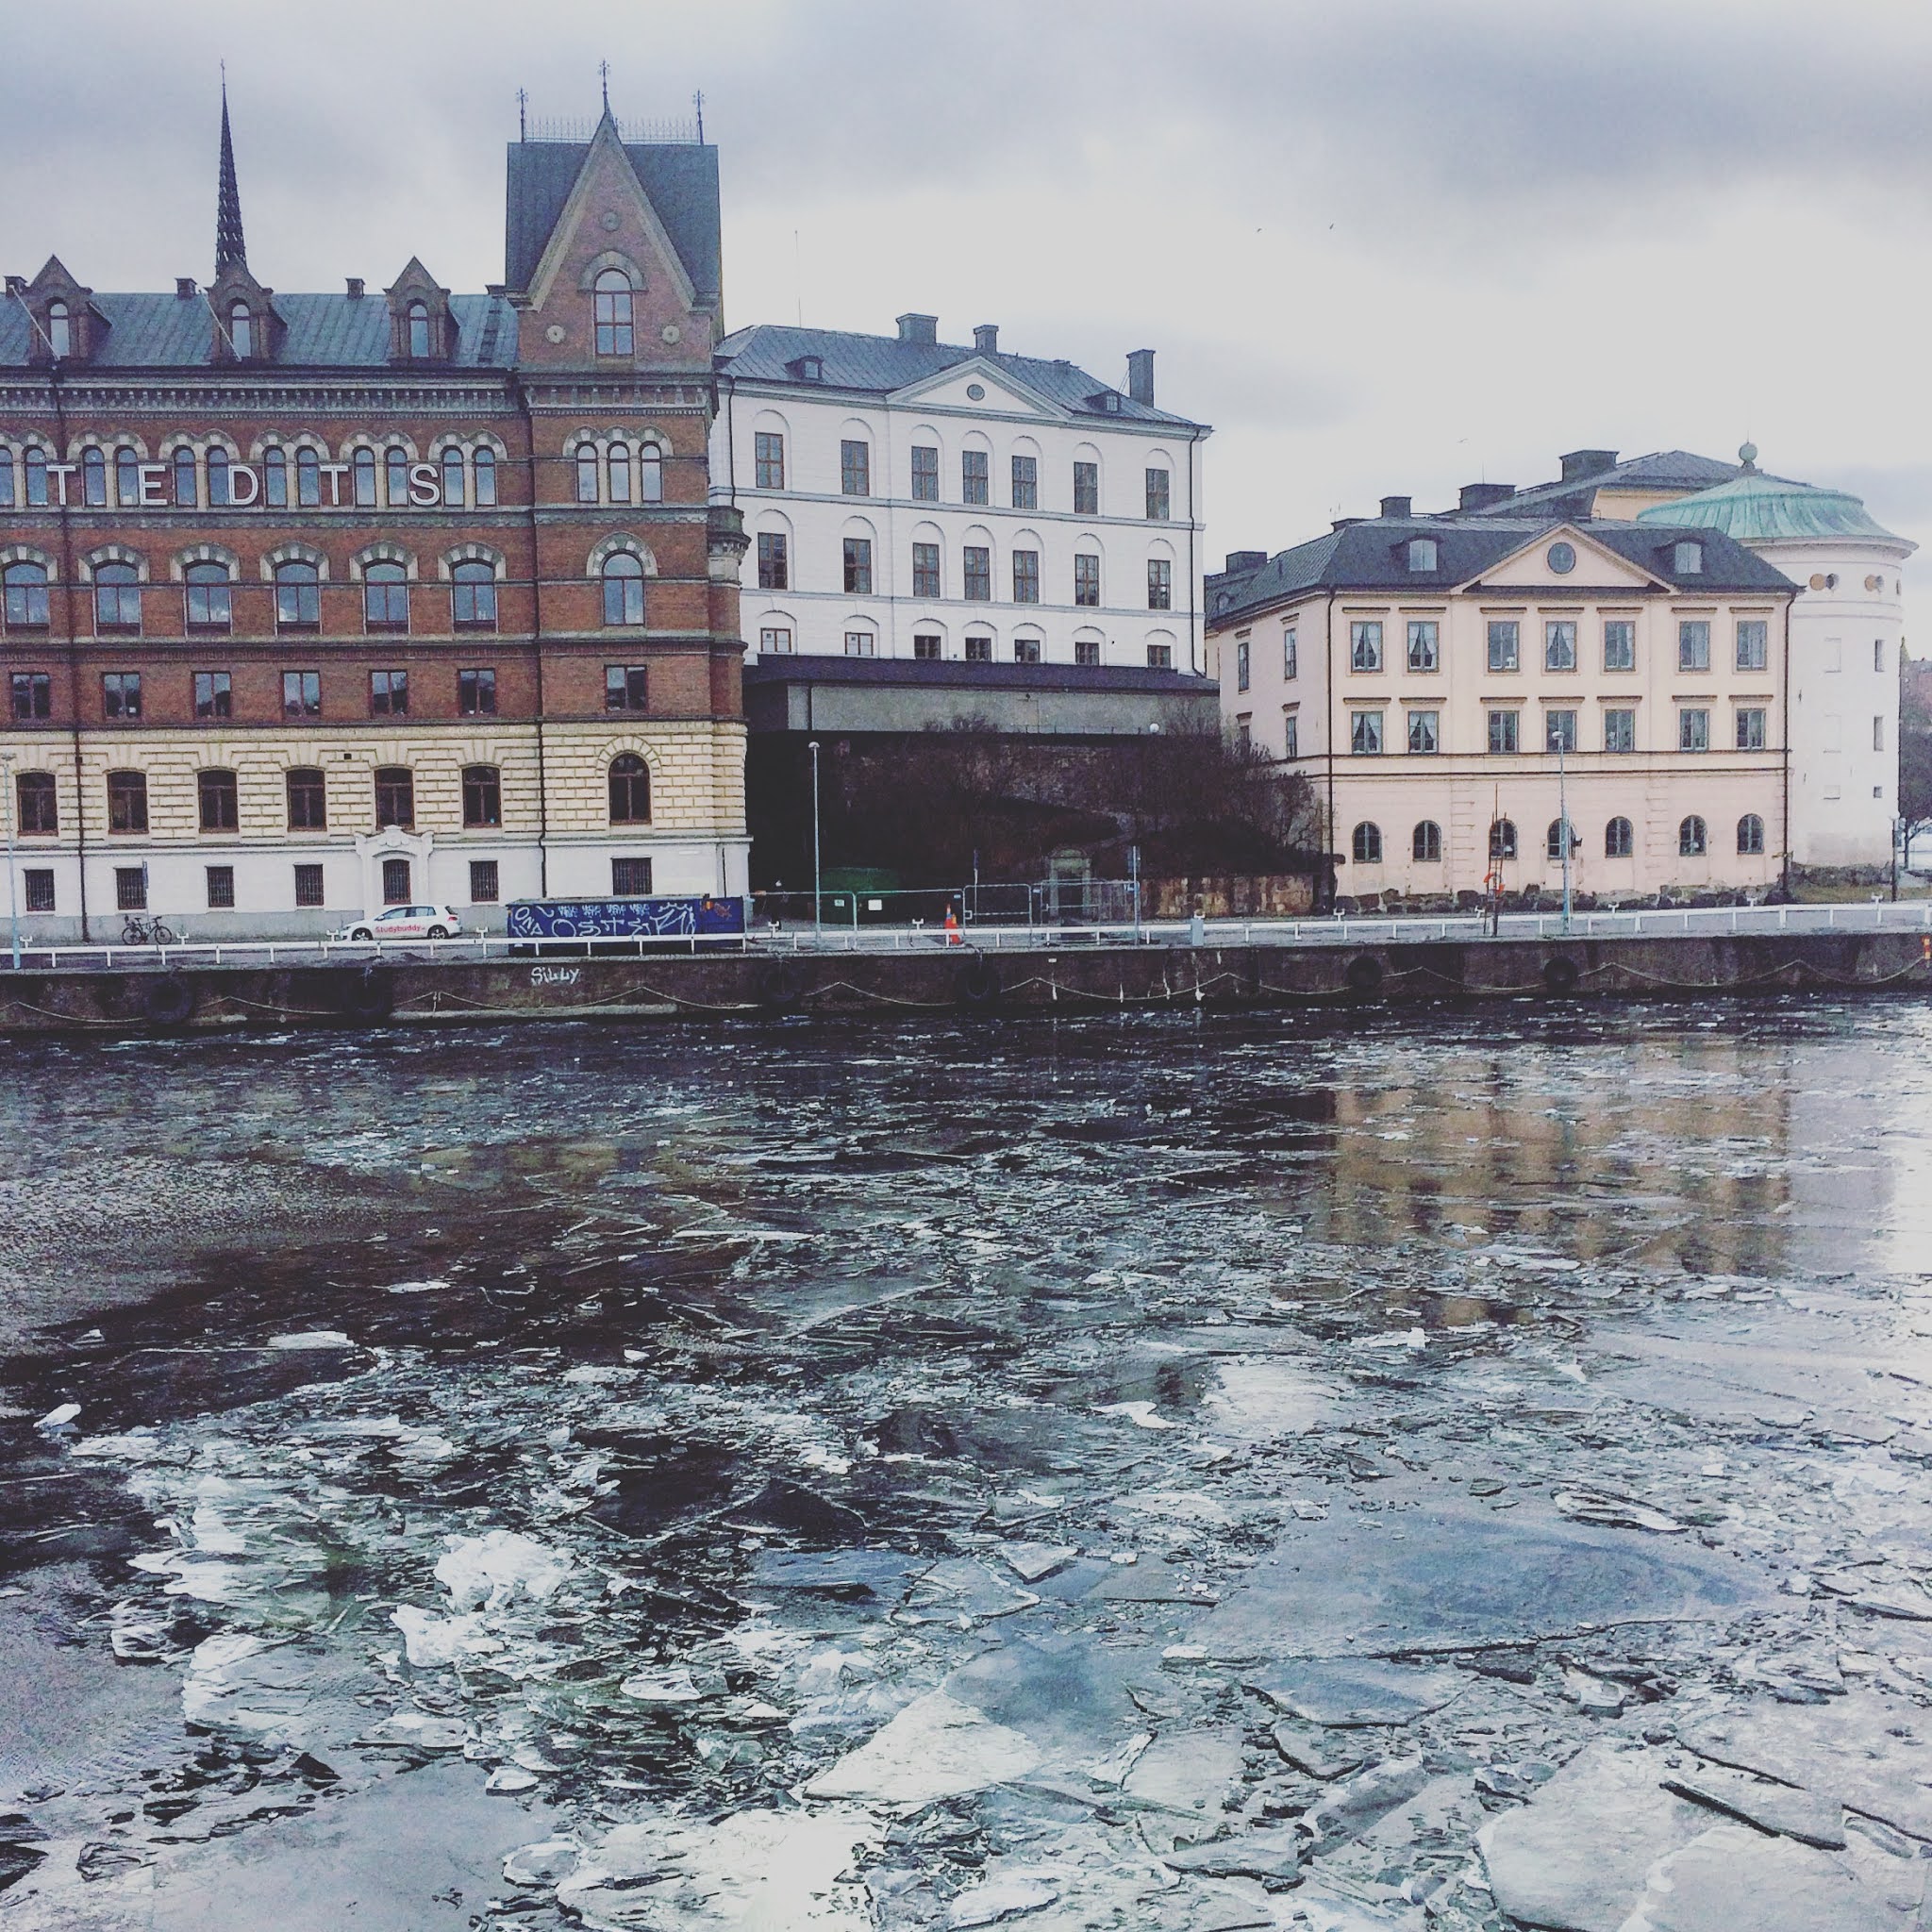 icy river running through stockholm city centre